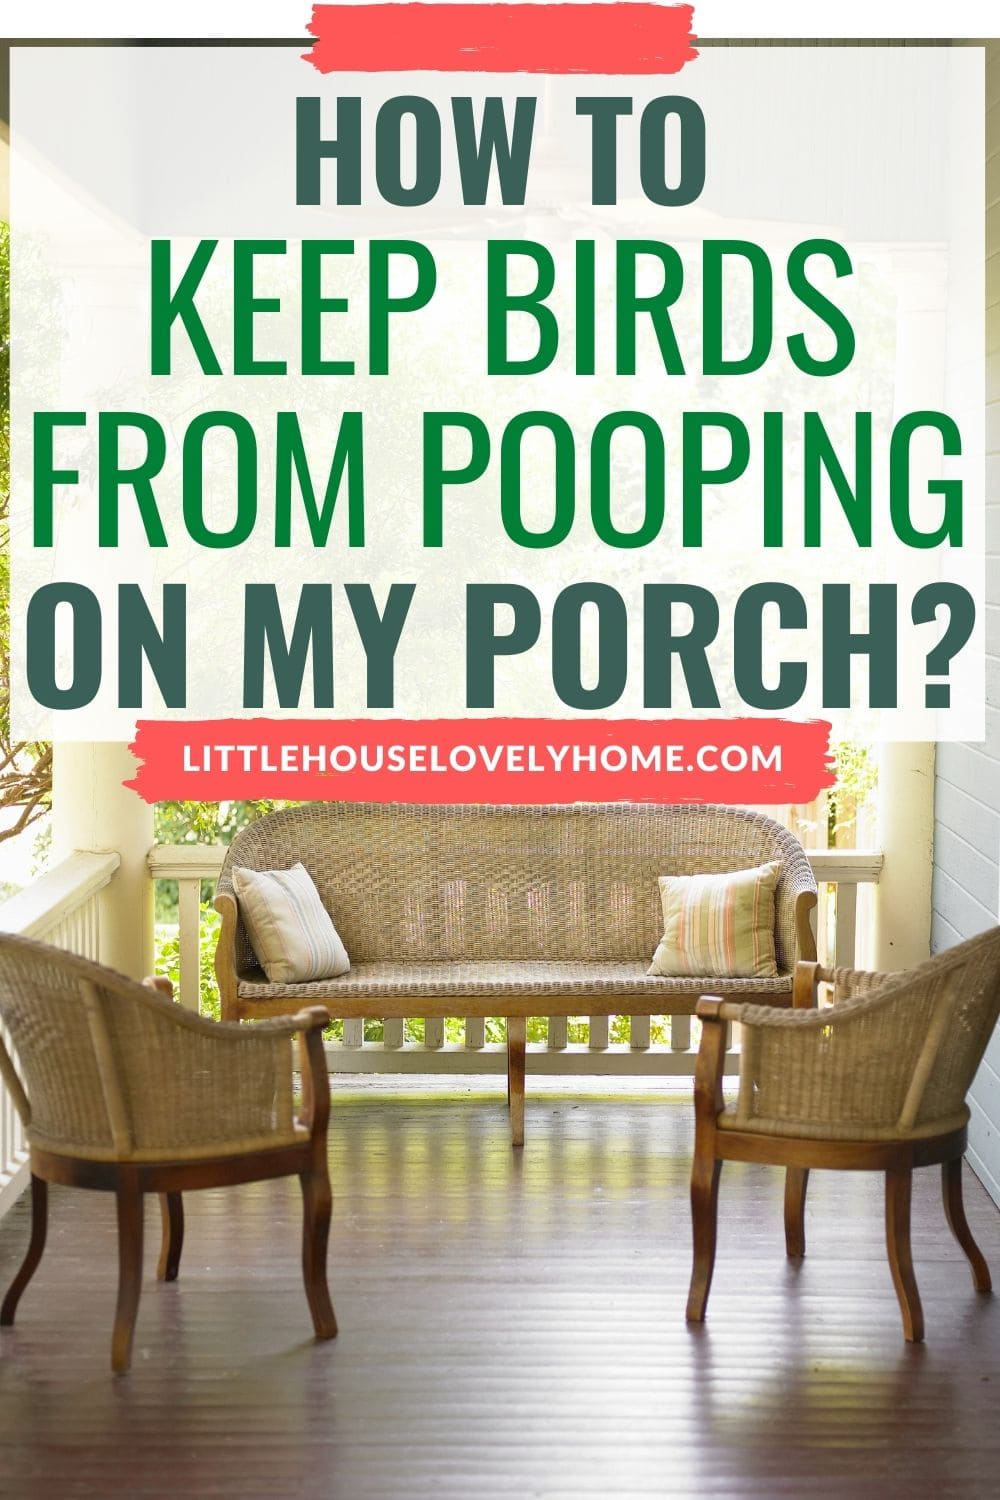 Image showing a porch with a set of seats and a text overlay that says How to keep birds from pooping on my porch